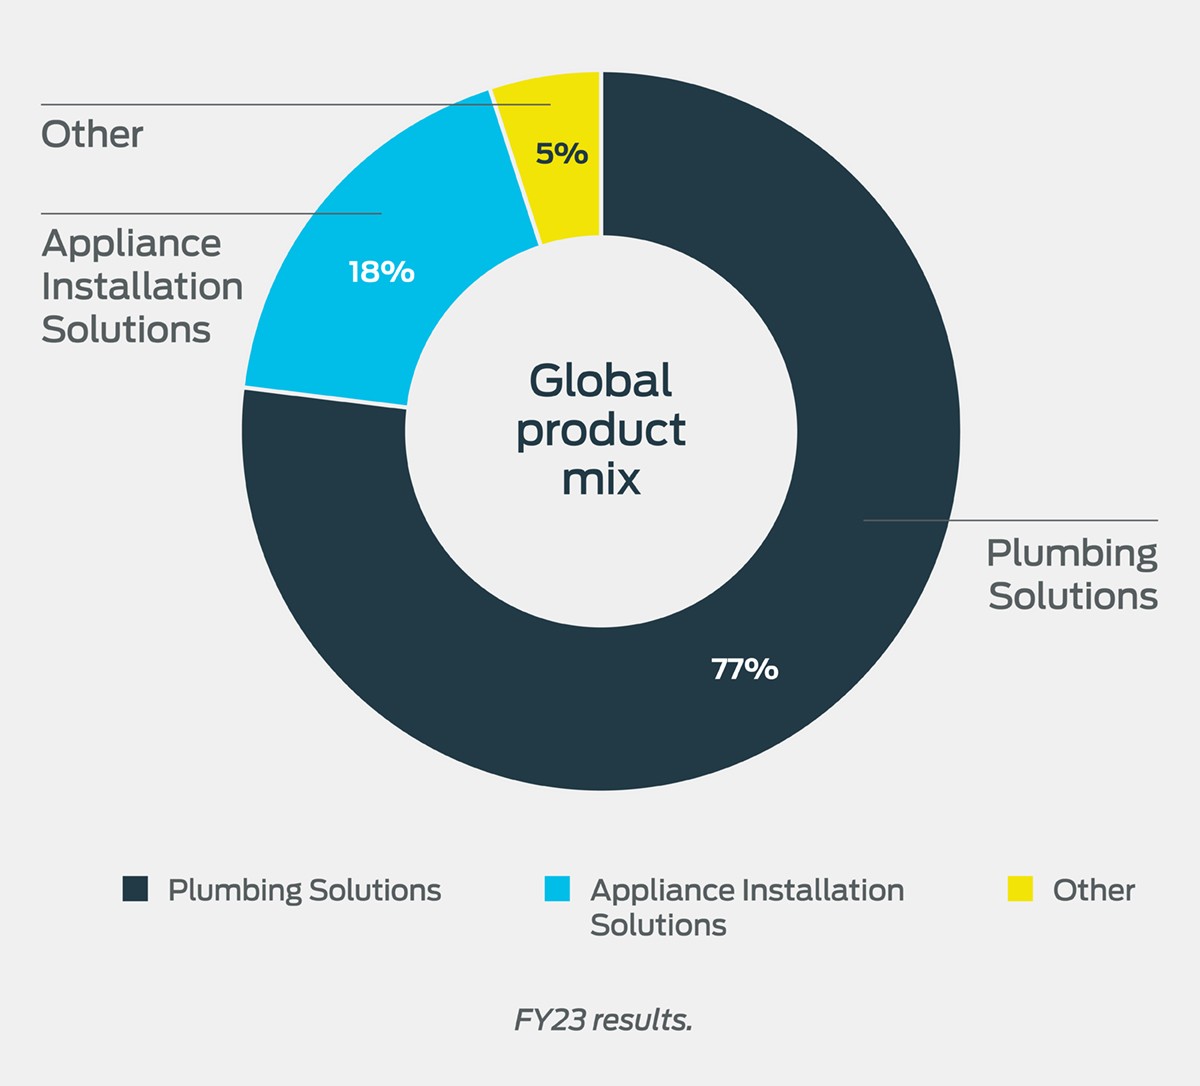 At a glance - Global product mix